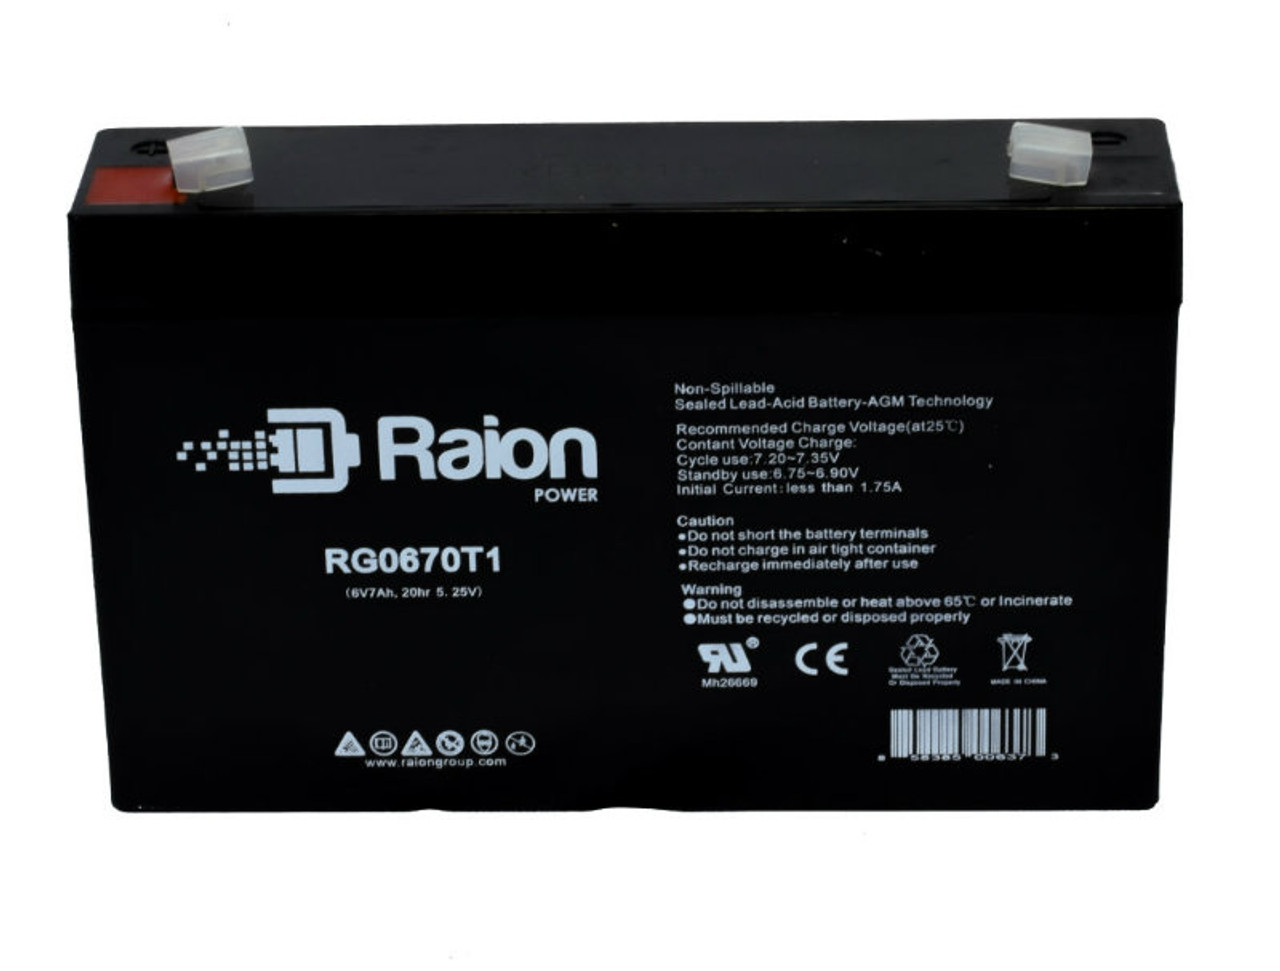 Raion Power RG0670T1 Replacement Battery Cartridge for Technacell EP66536